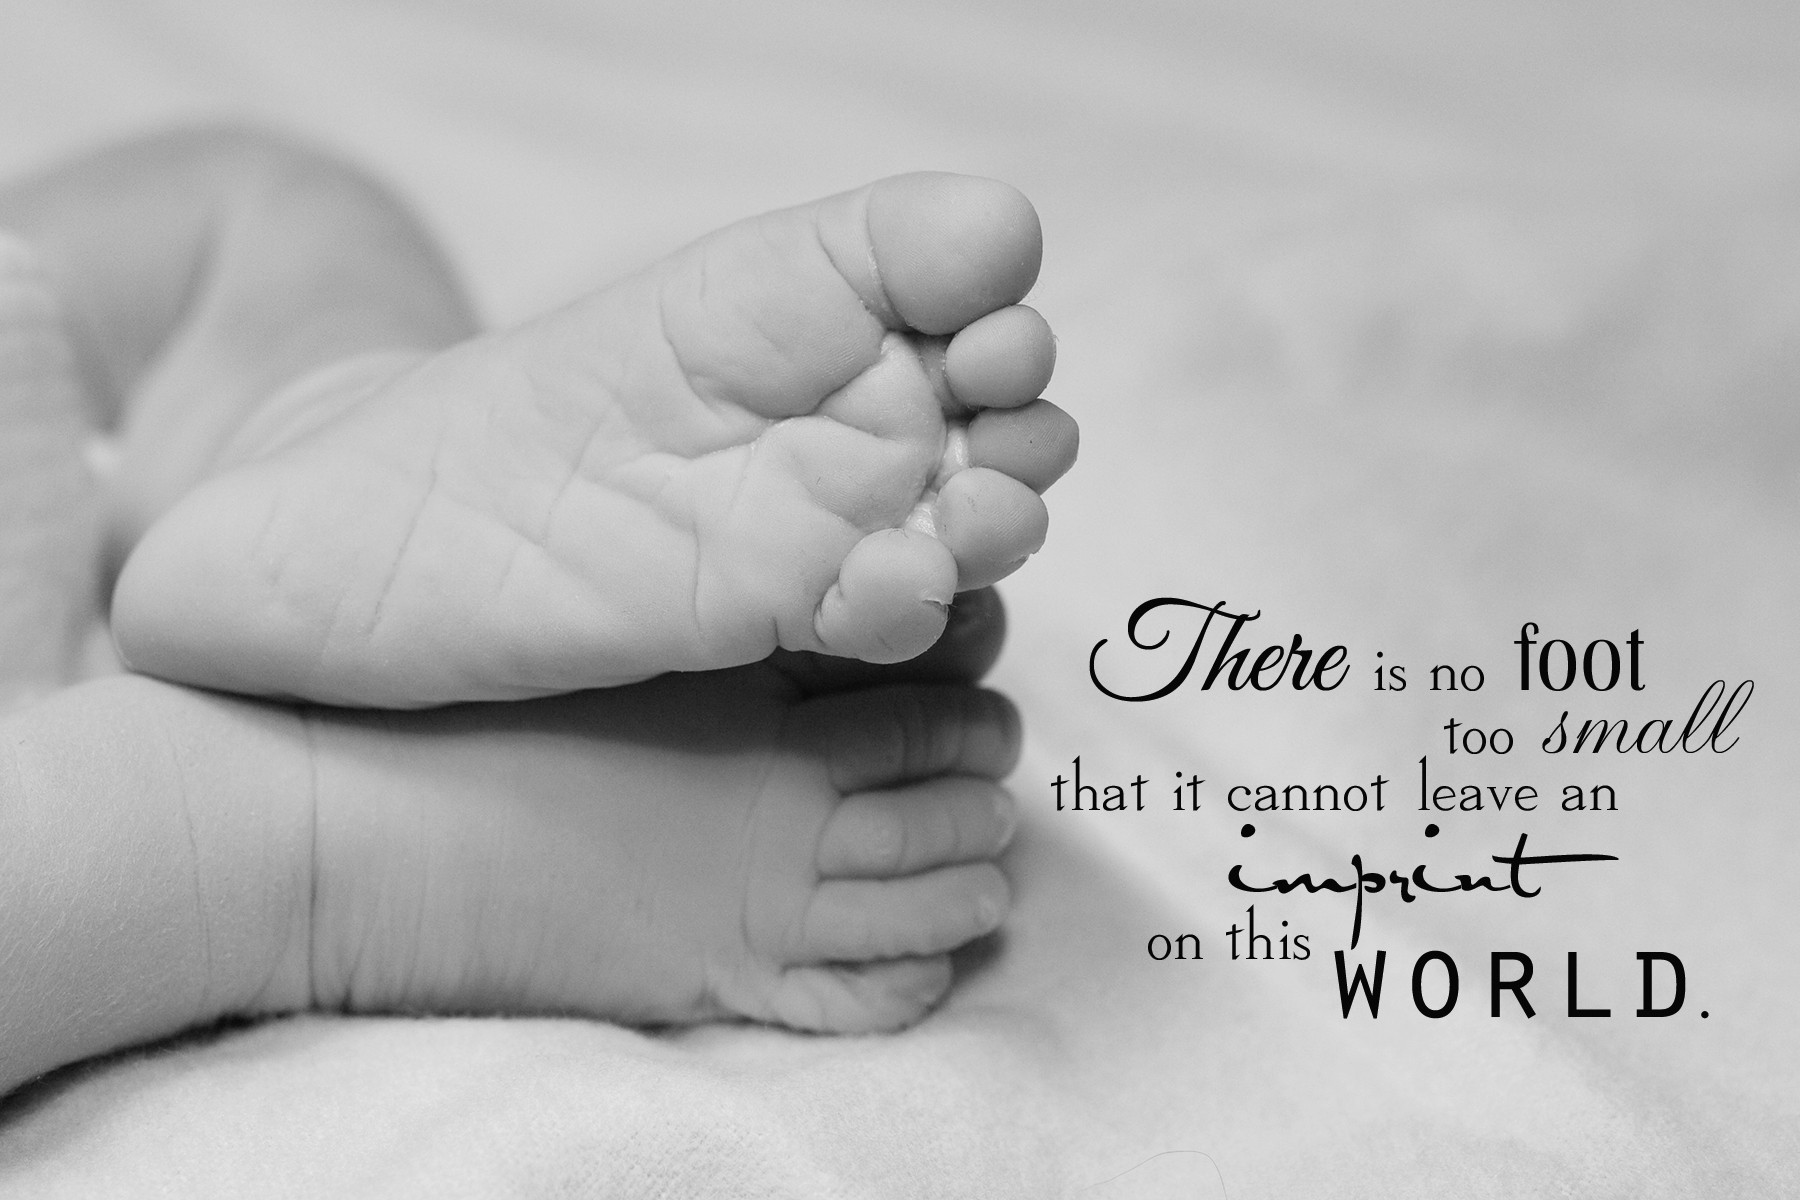 When Someone Dies A Baby Is Born Quote
 Words of Wisdom